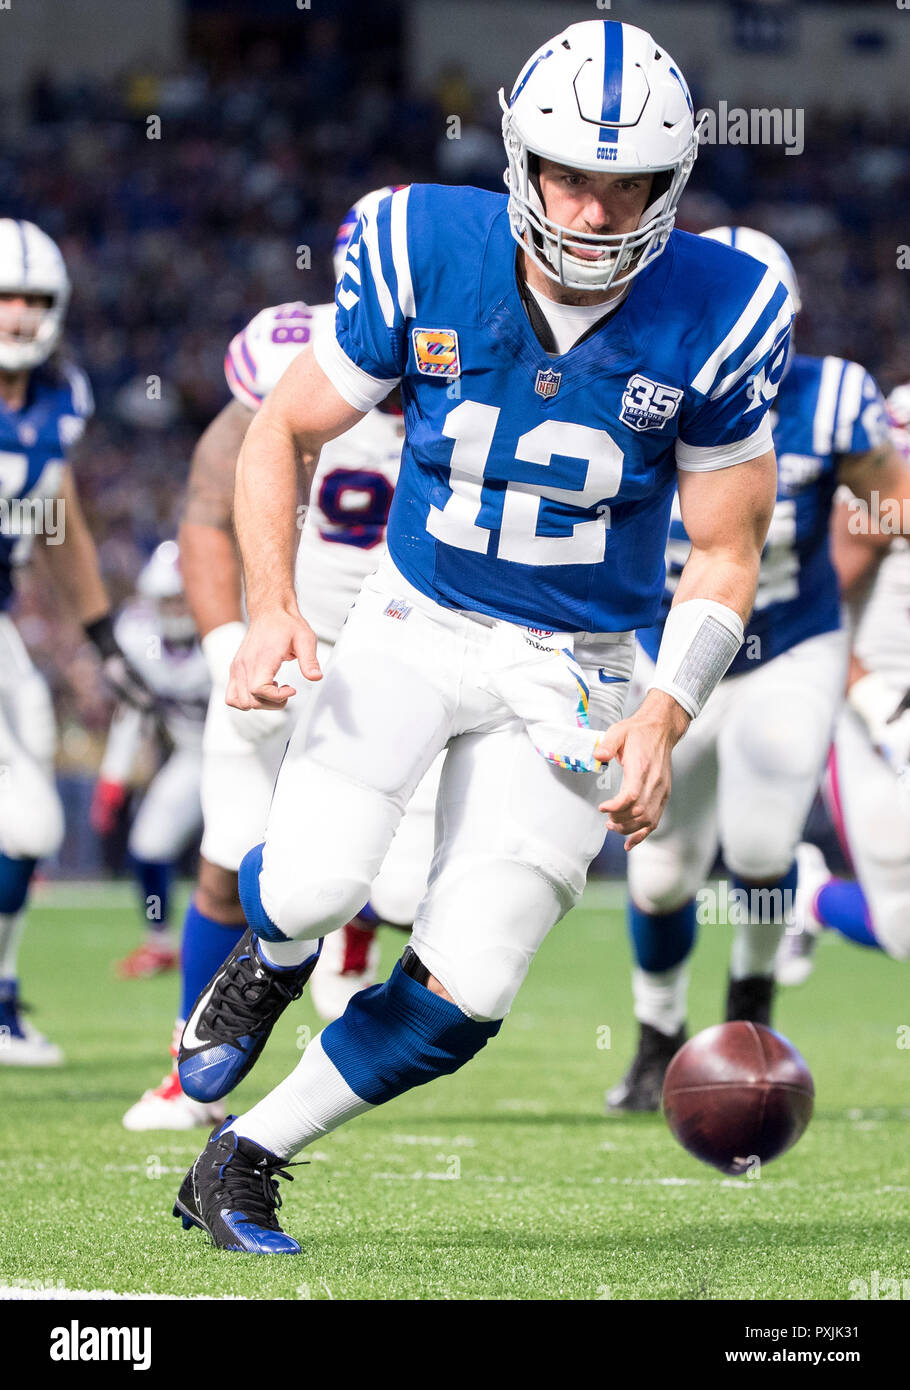 Indianapolis, Indiana, USA. 21st Oct, 2018. Indianapolis Colts quarterback Andrew Luck (12) attempts to recover loose ball during NFL football game action between the Buffalo Bills and the Indianapolis Colts at Lucas Oil Stadium in Indianapolis, Indiana. Indianapolis defeated Buffalo 37-5. John Mersits/CSM/Alamy Live News Stock Photo